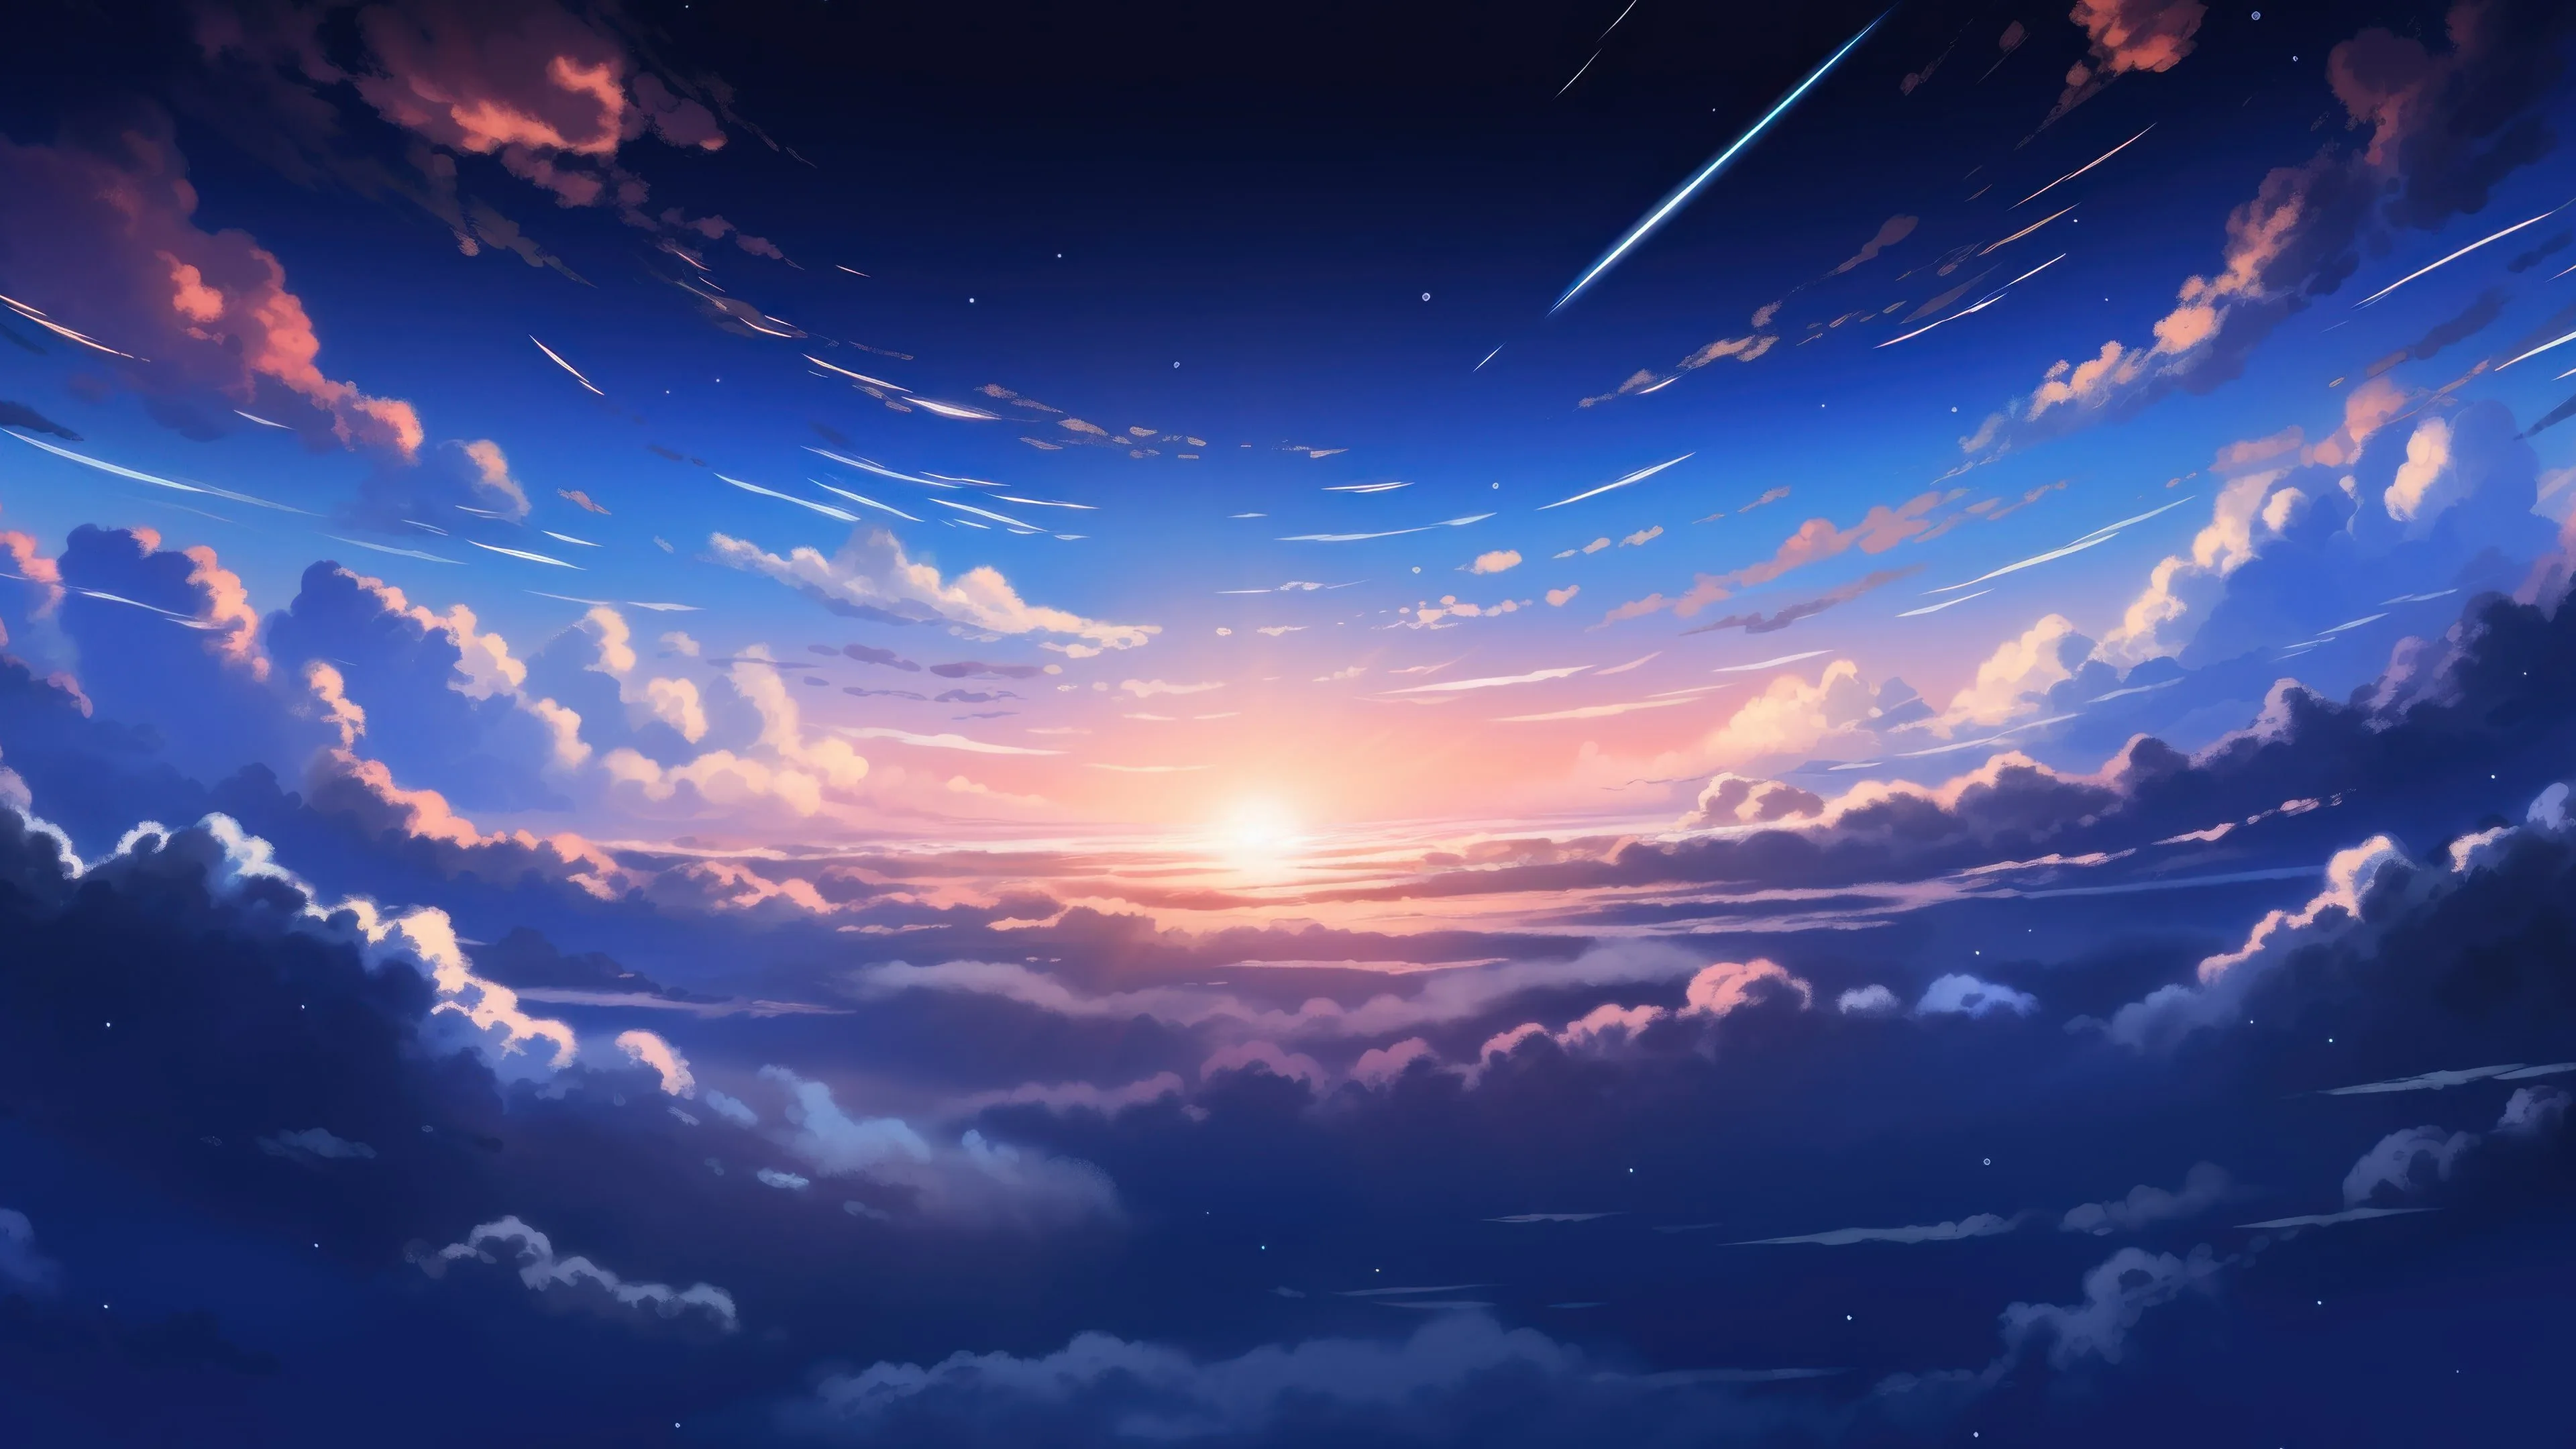 HD wallpaper: anime 4k background for pc, sky, cloud - sky, nature, sunset